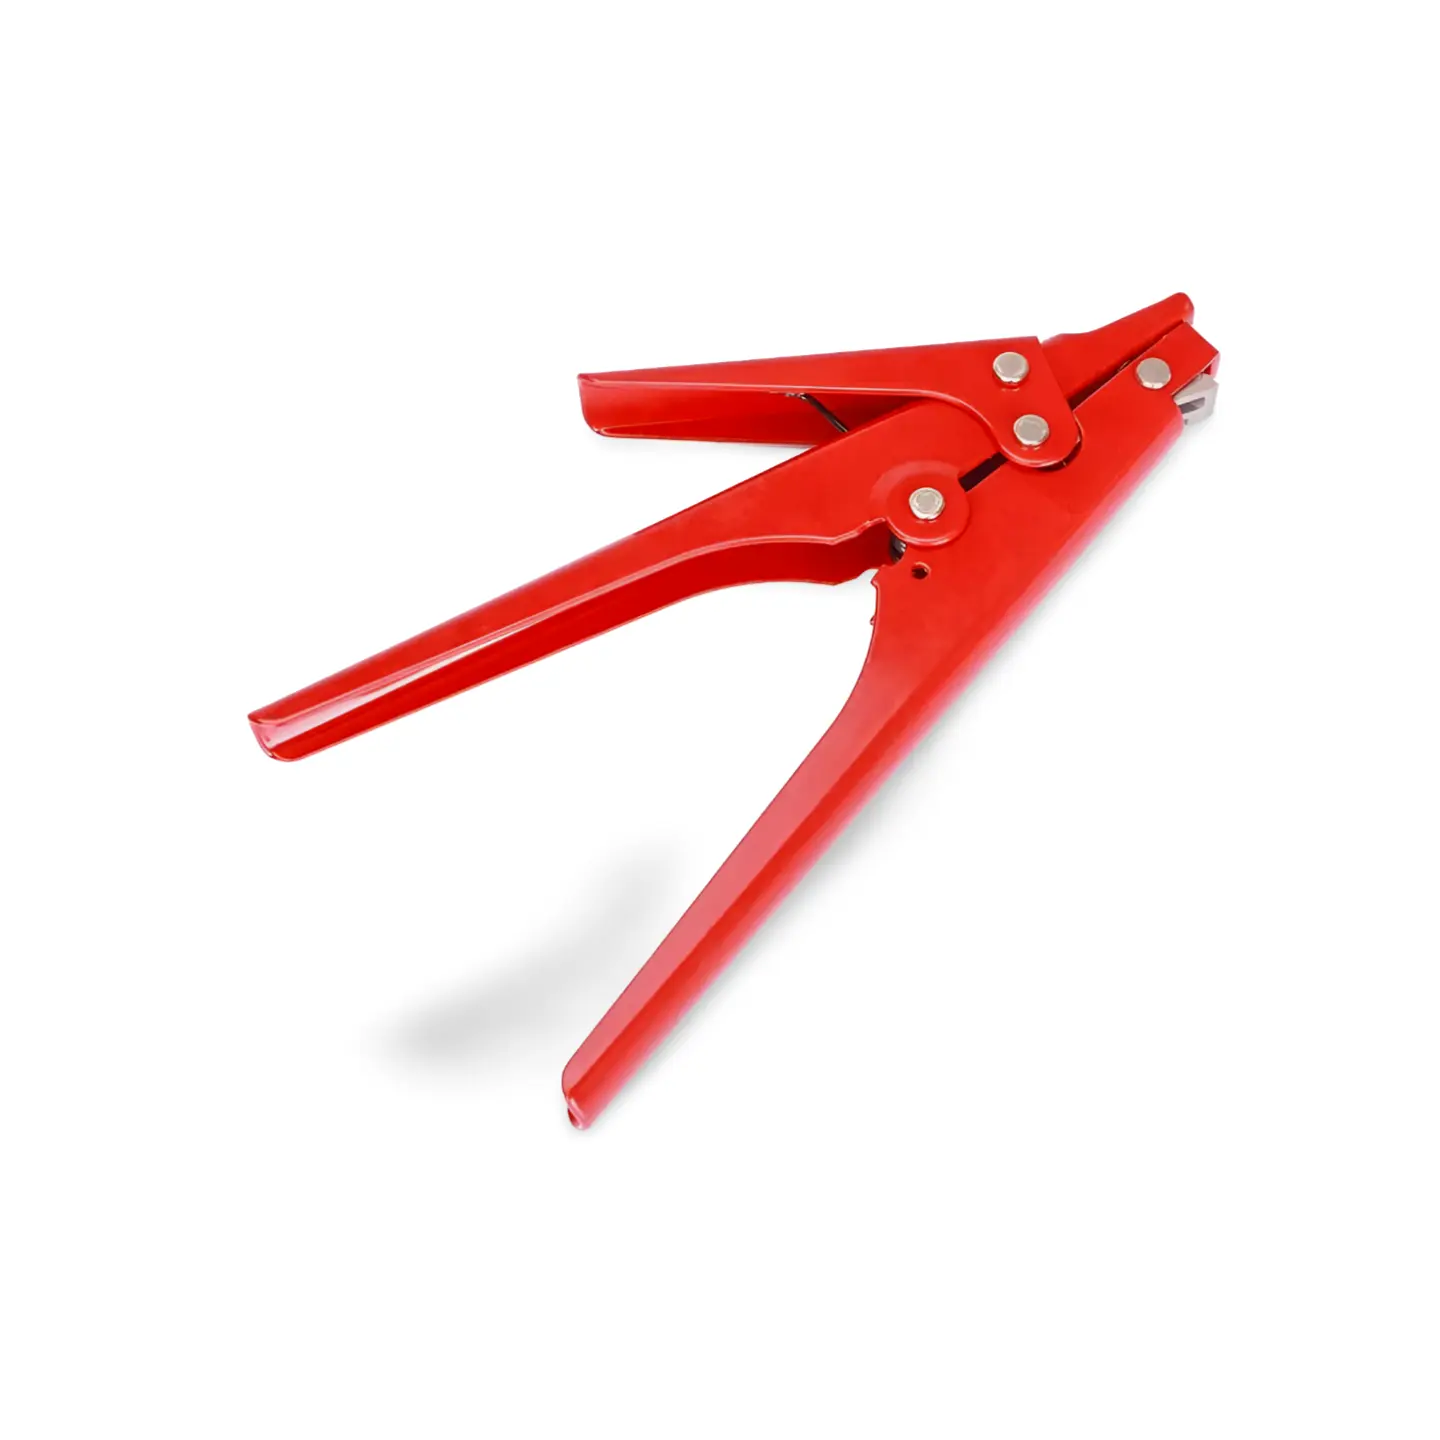 Cable ties Tightening tool plier type